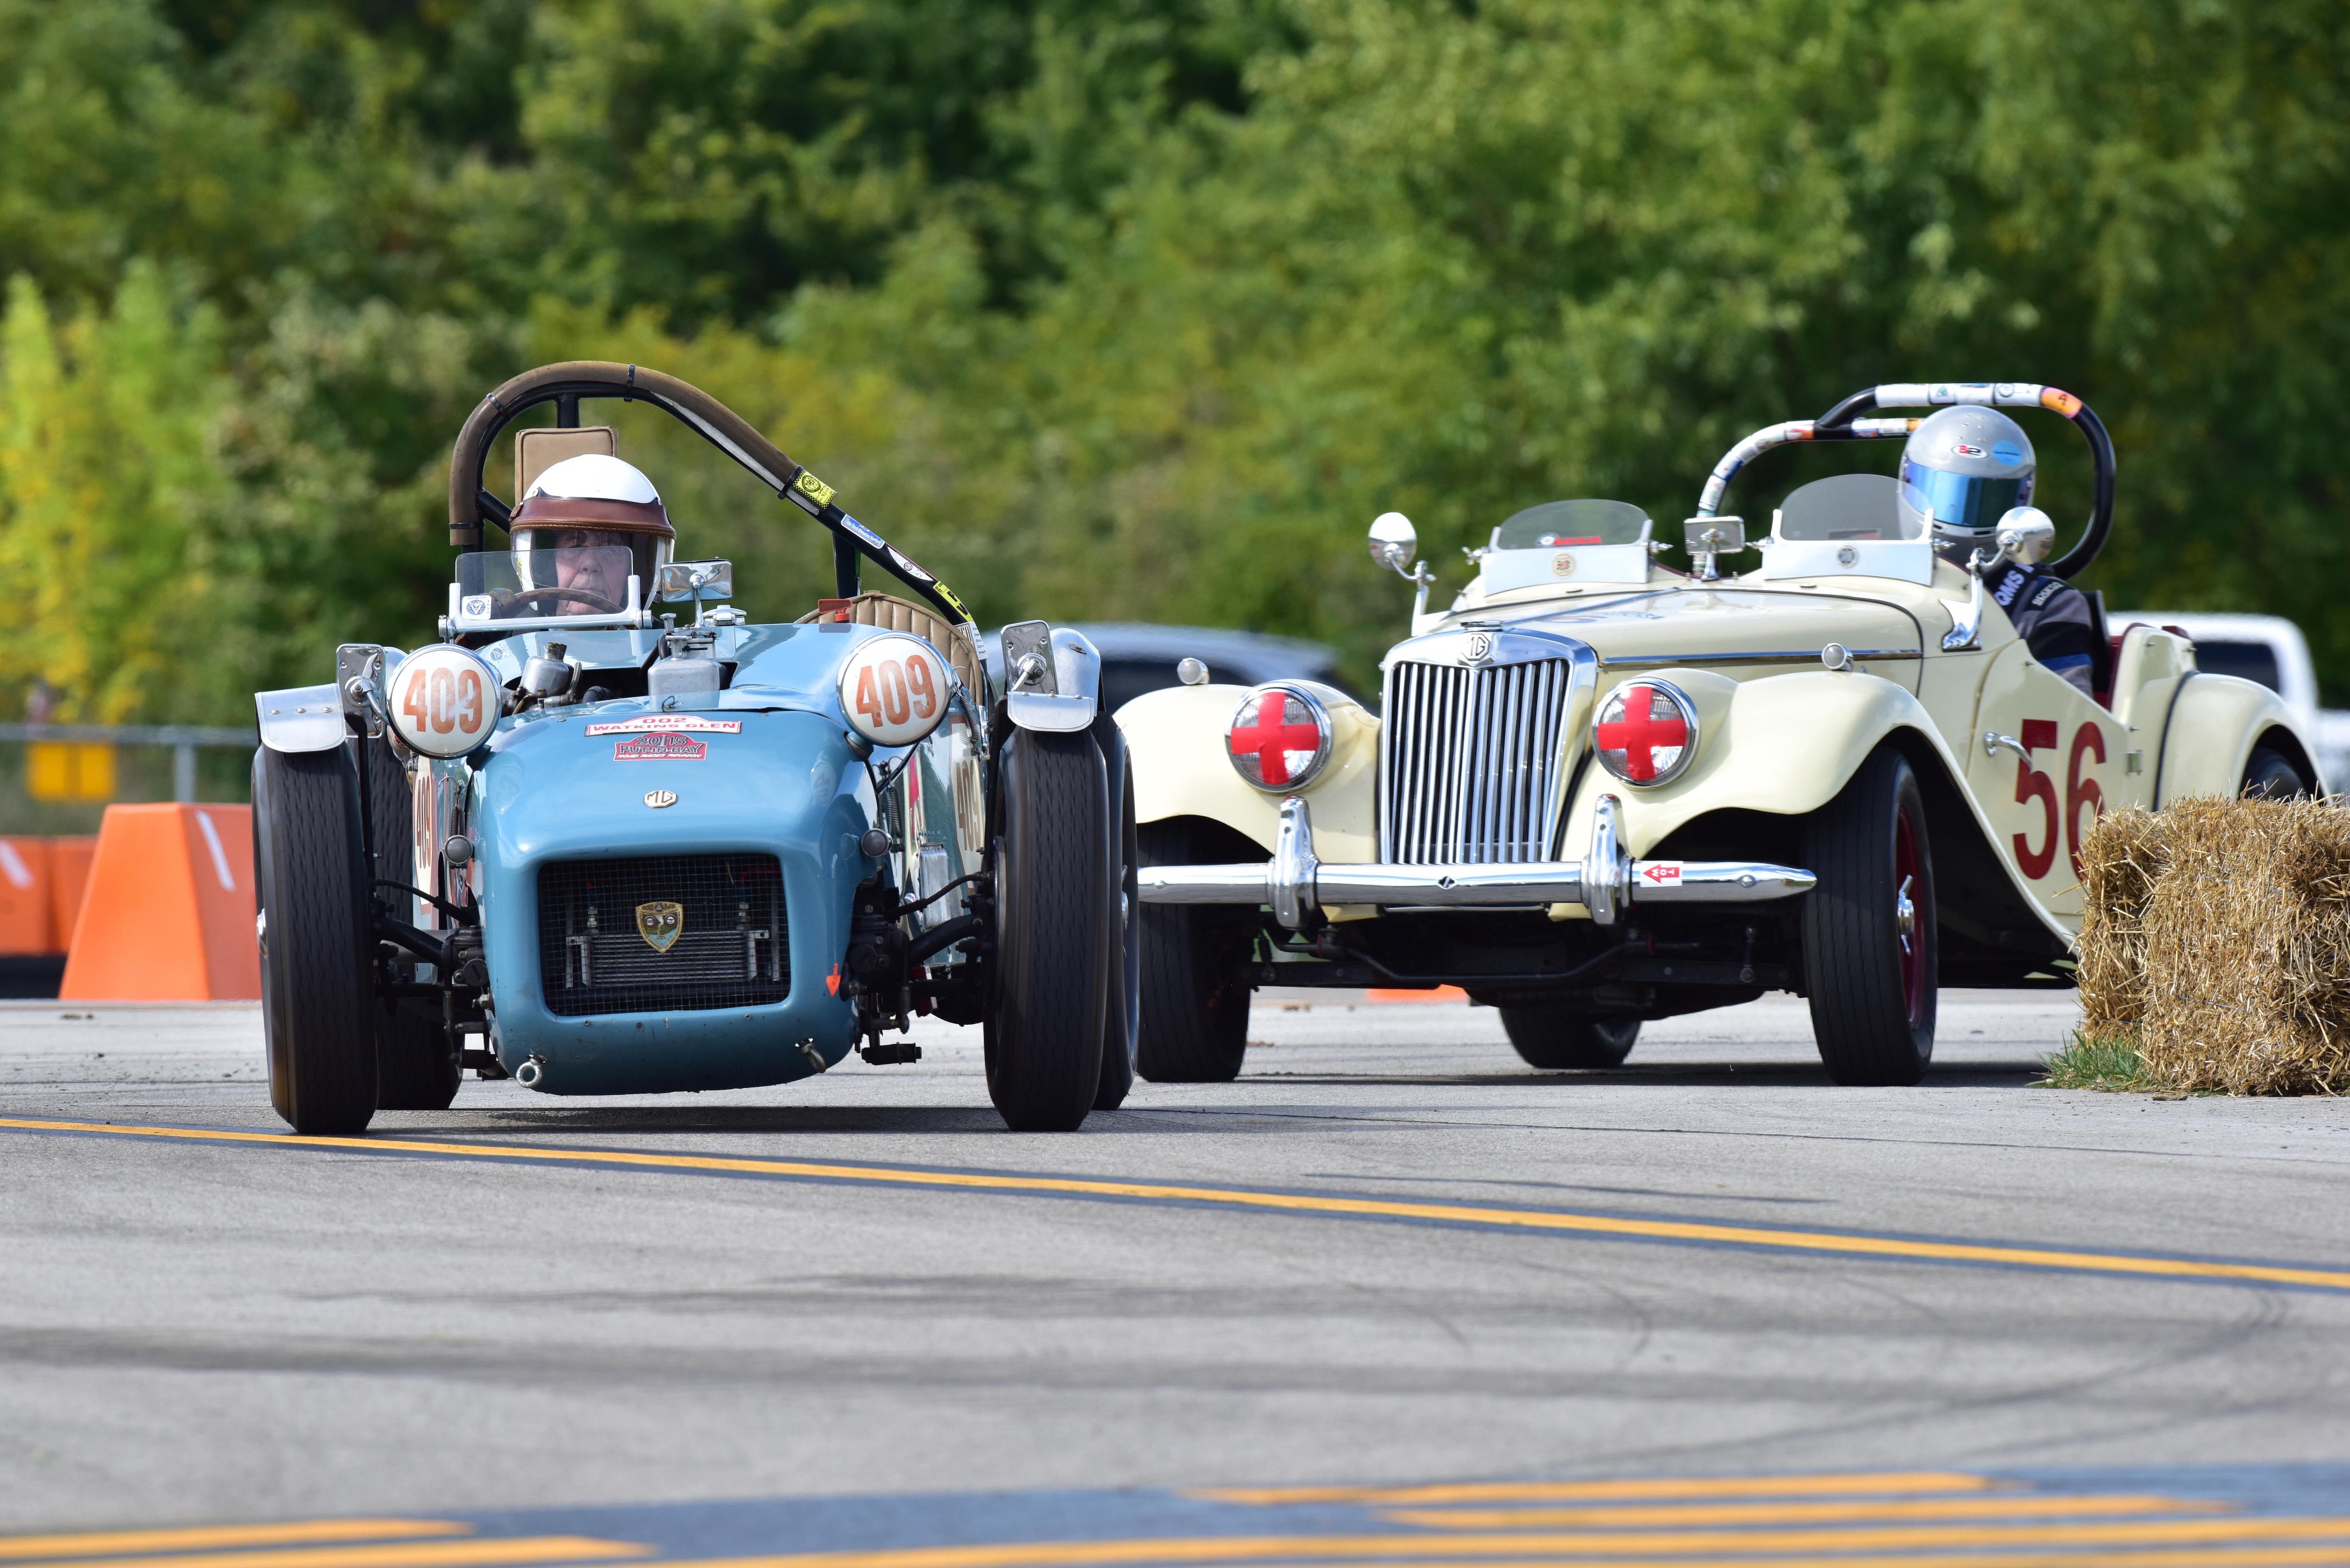 Put-in-Bay sports car races conclude with eclectic cup race